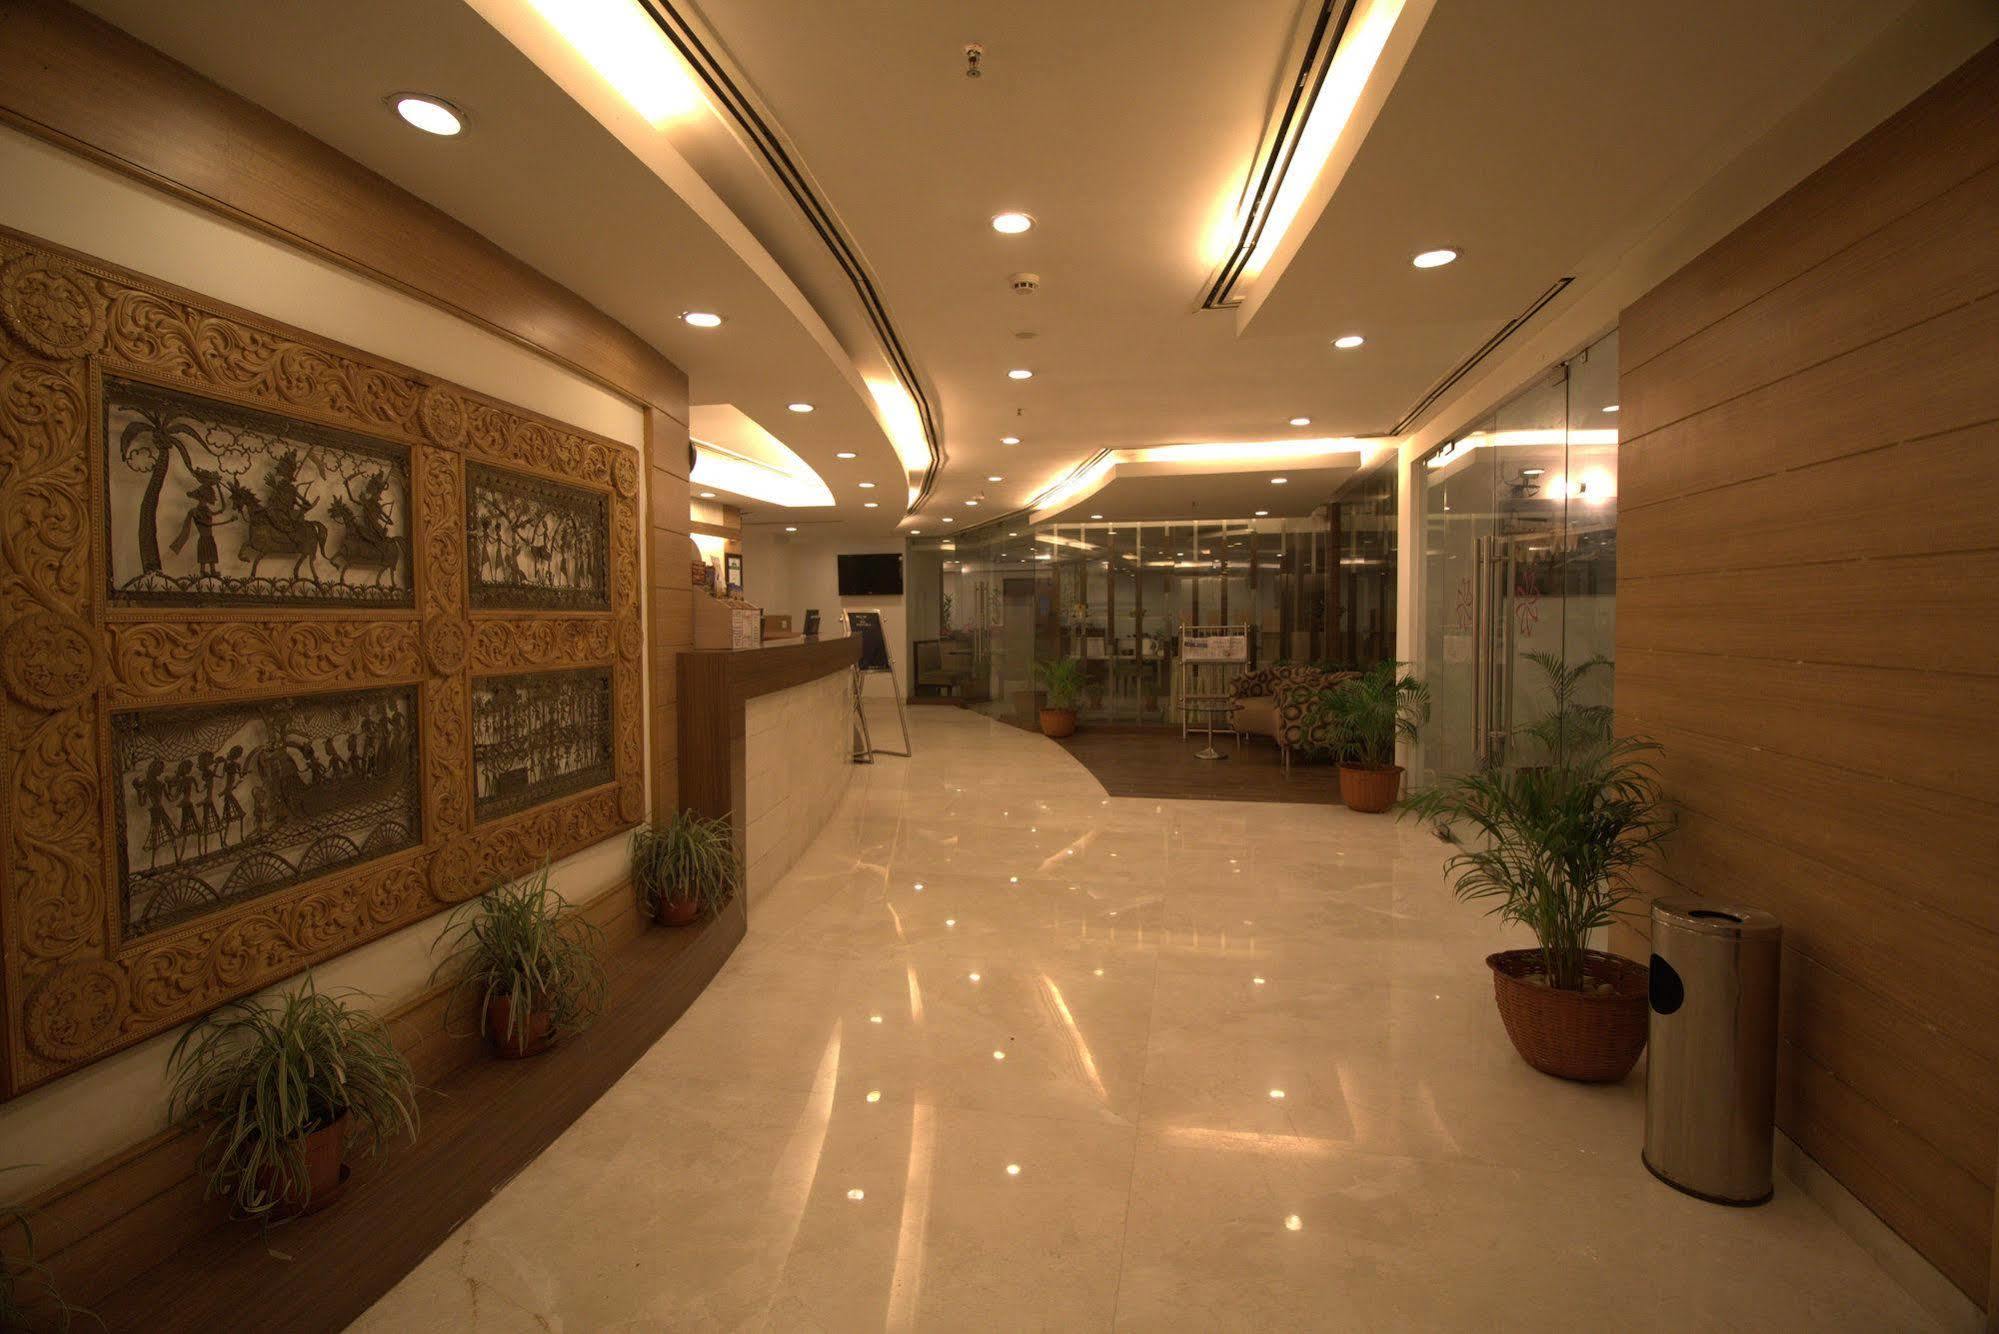 Ira By Orchid Bhubaneswar Hotel Exterior photo